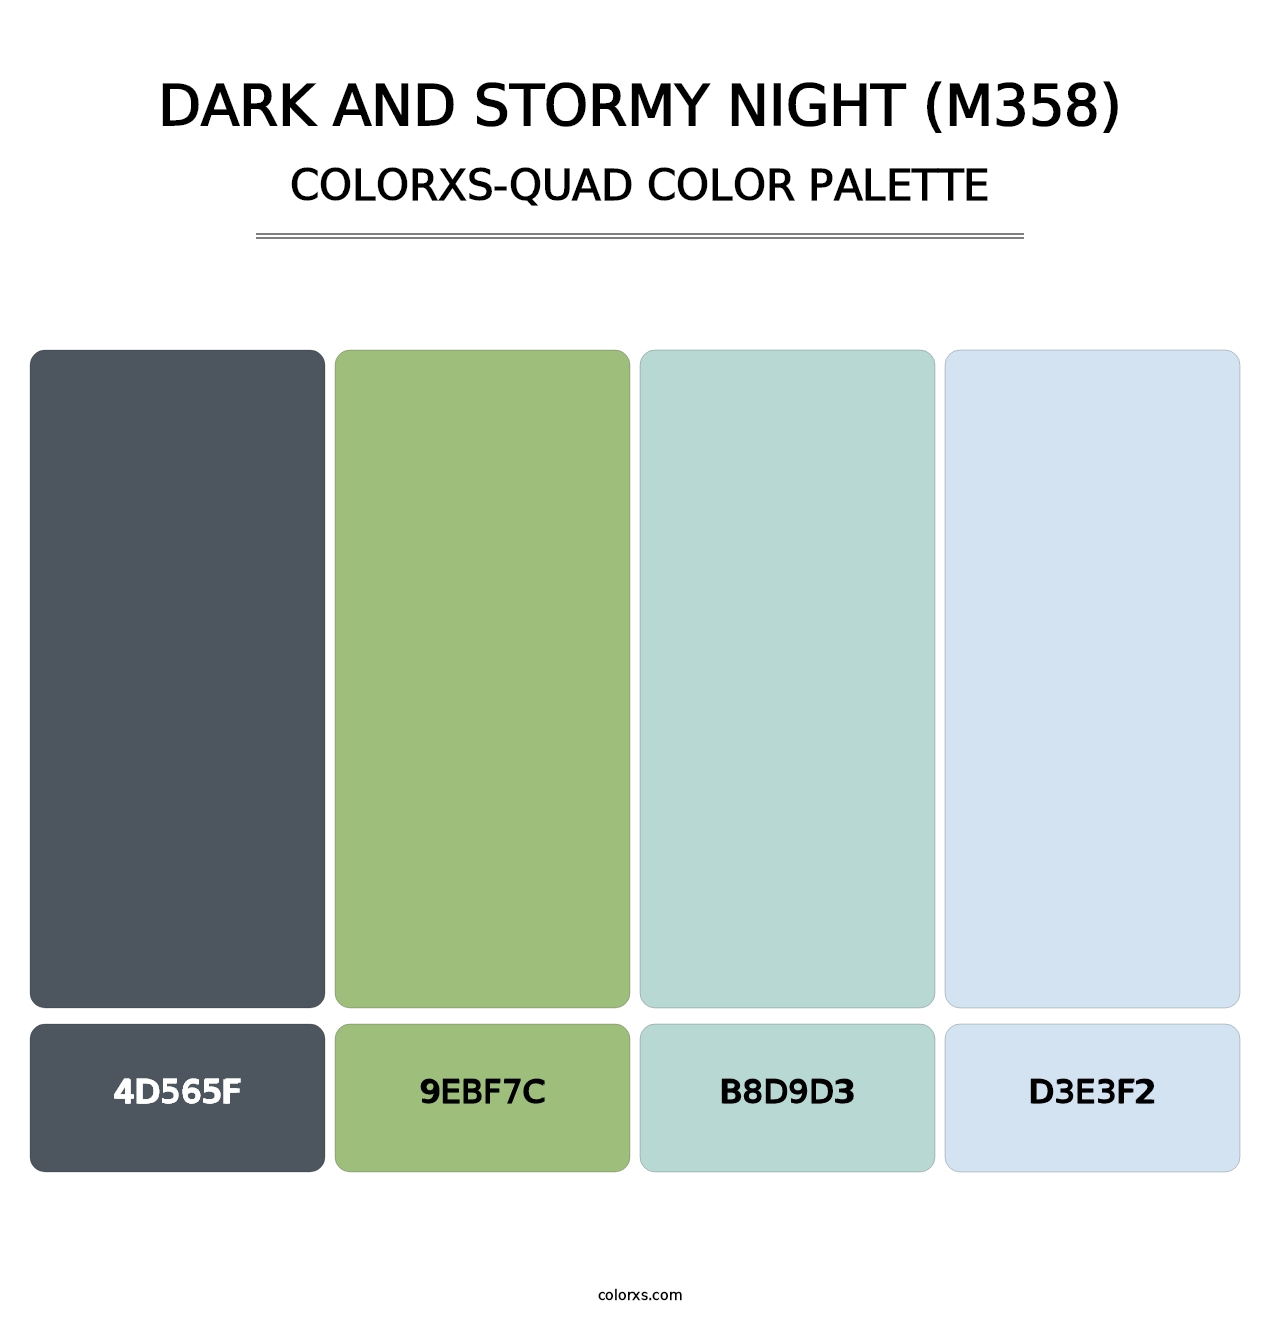 Dark and Stormy Night (M358) - Colorxs Quad Palette